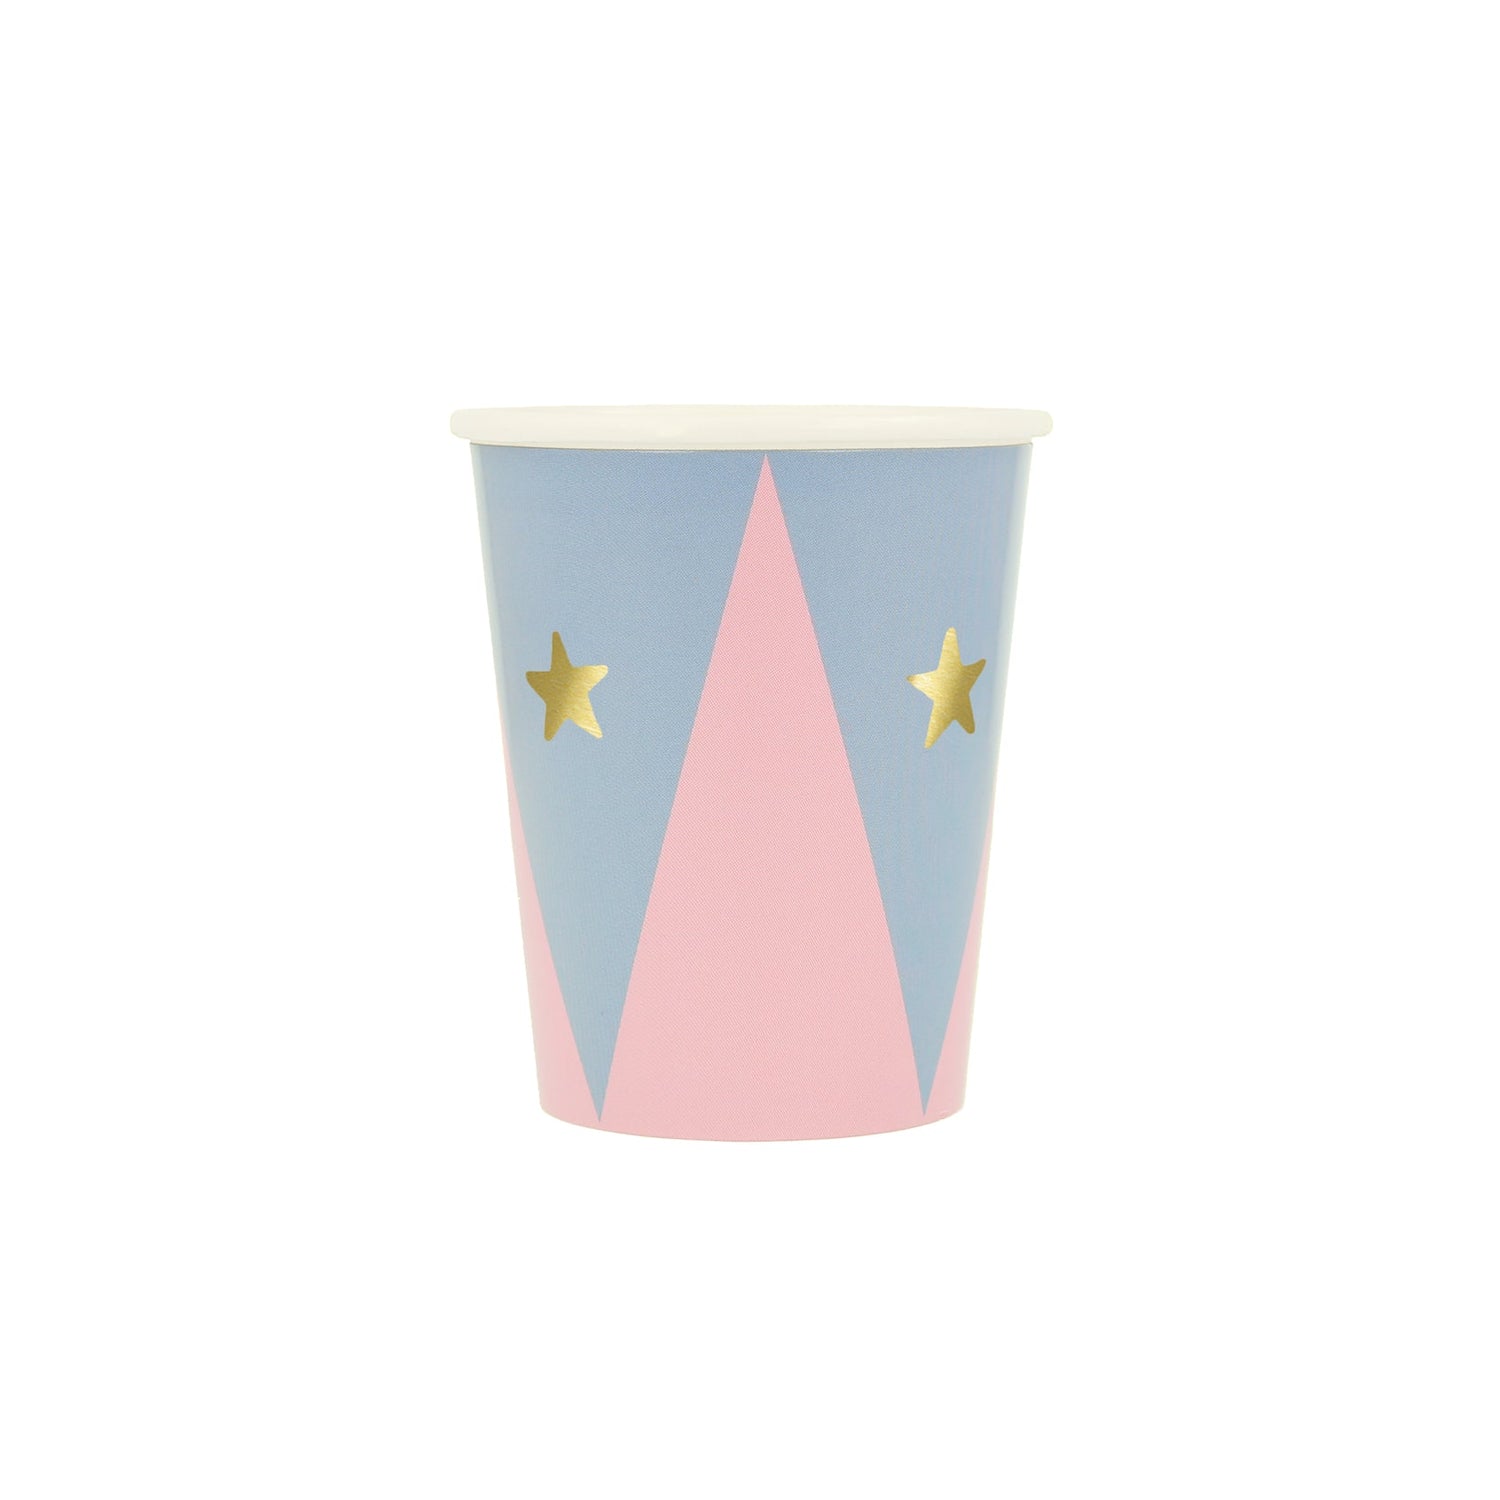 A collection of nine Meri Meri Circus Cups with geometric shapes, shiny gold foil details, and star patterns on a white background.